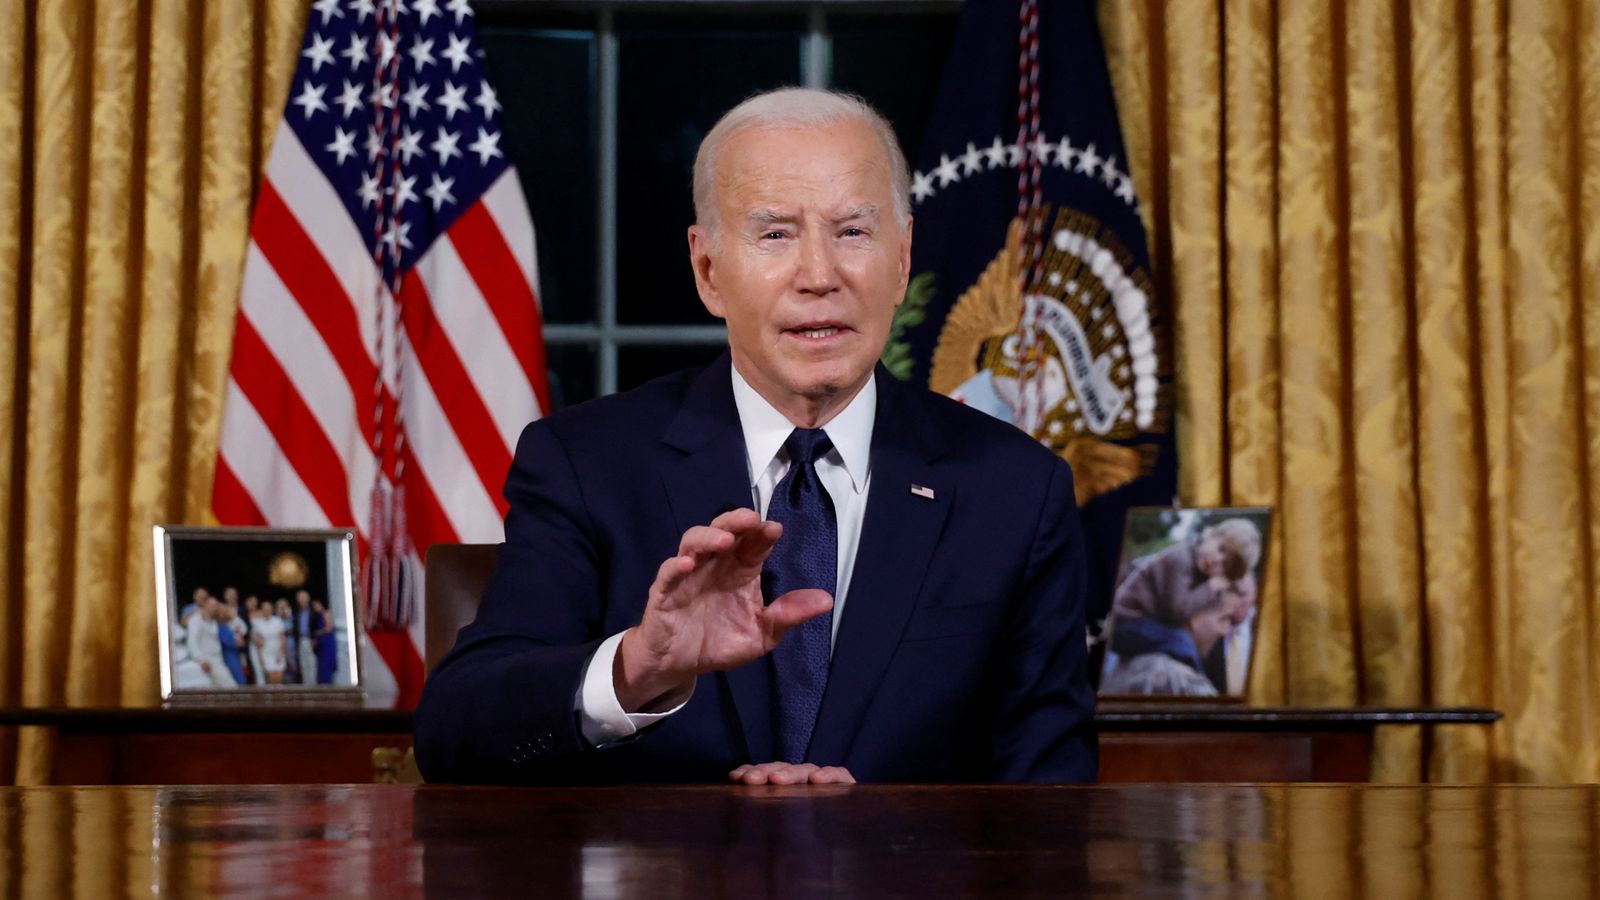 Joe Biden says Putin and Hamas both want to ‘annihilate’ neighbouring democracies in address from Oval Office